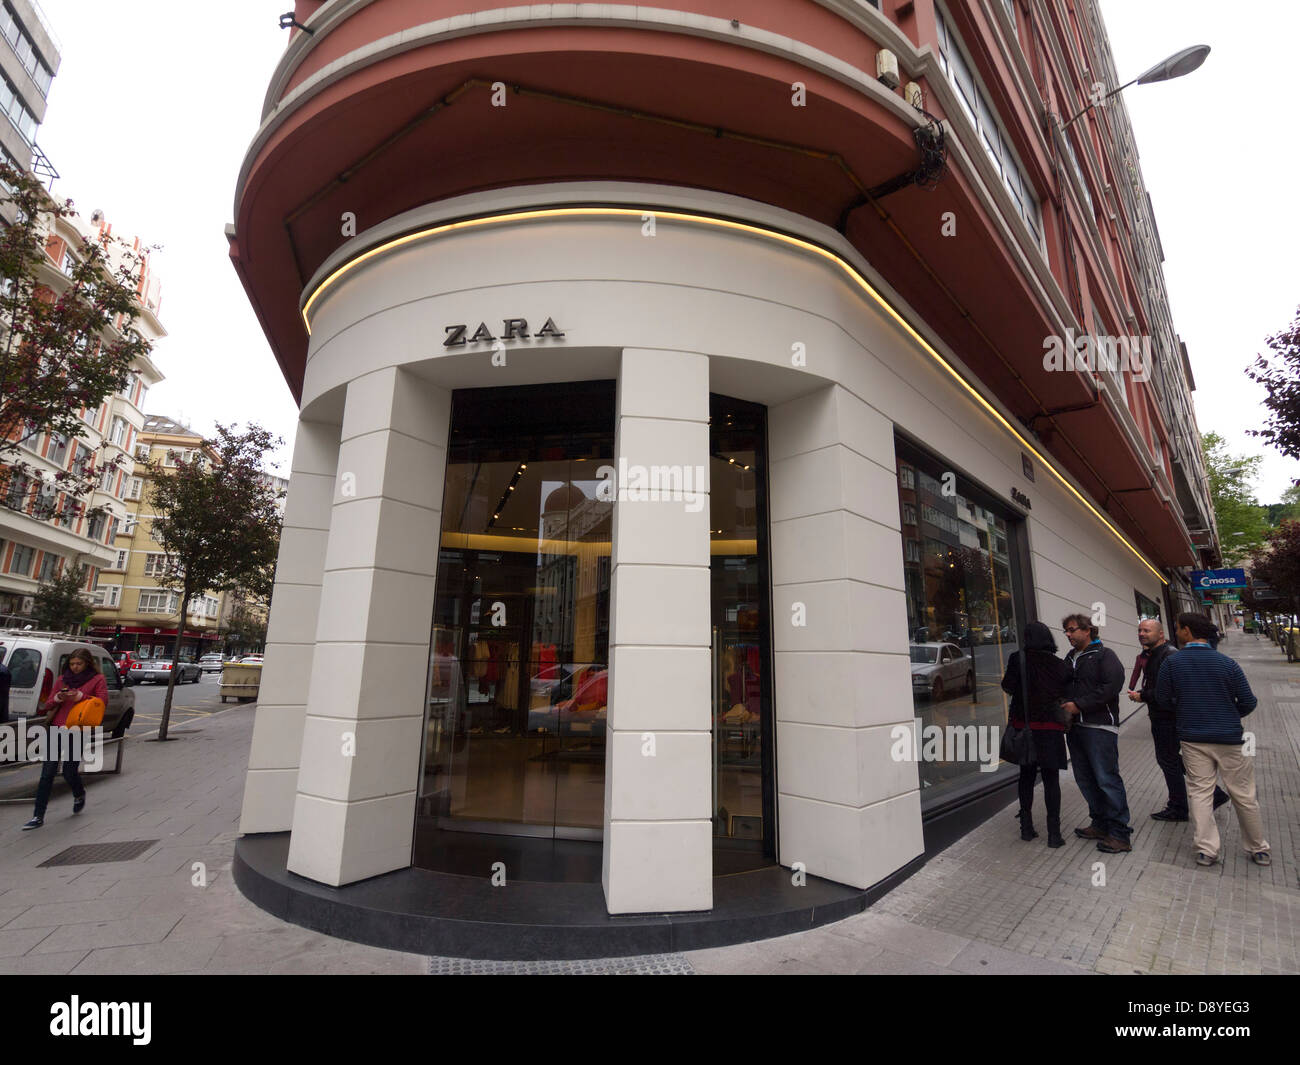 Building where the first Zara store in the world was opened in 1975 Stock  Photo - Alamy